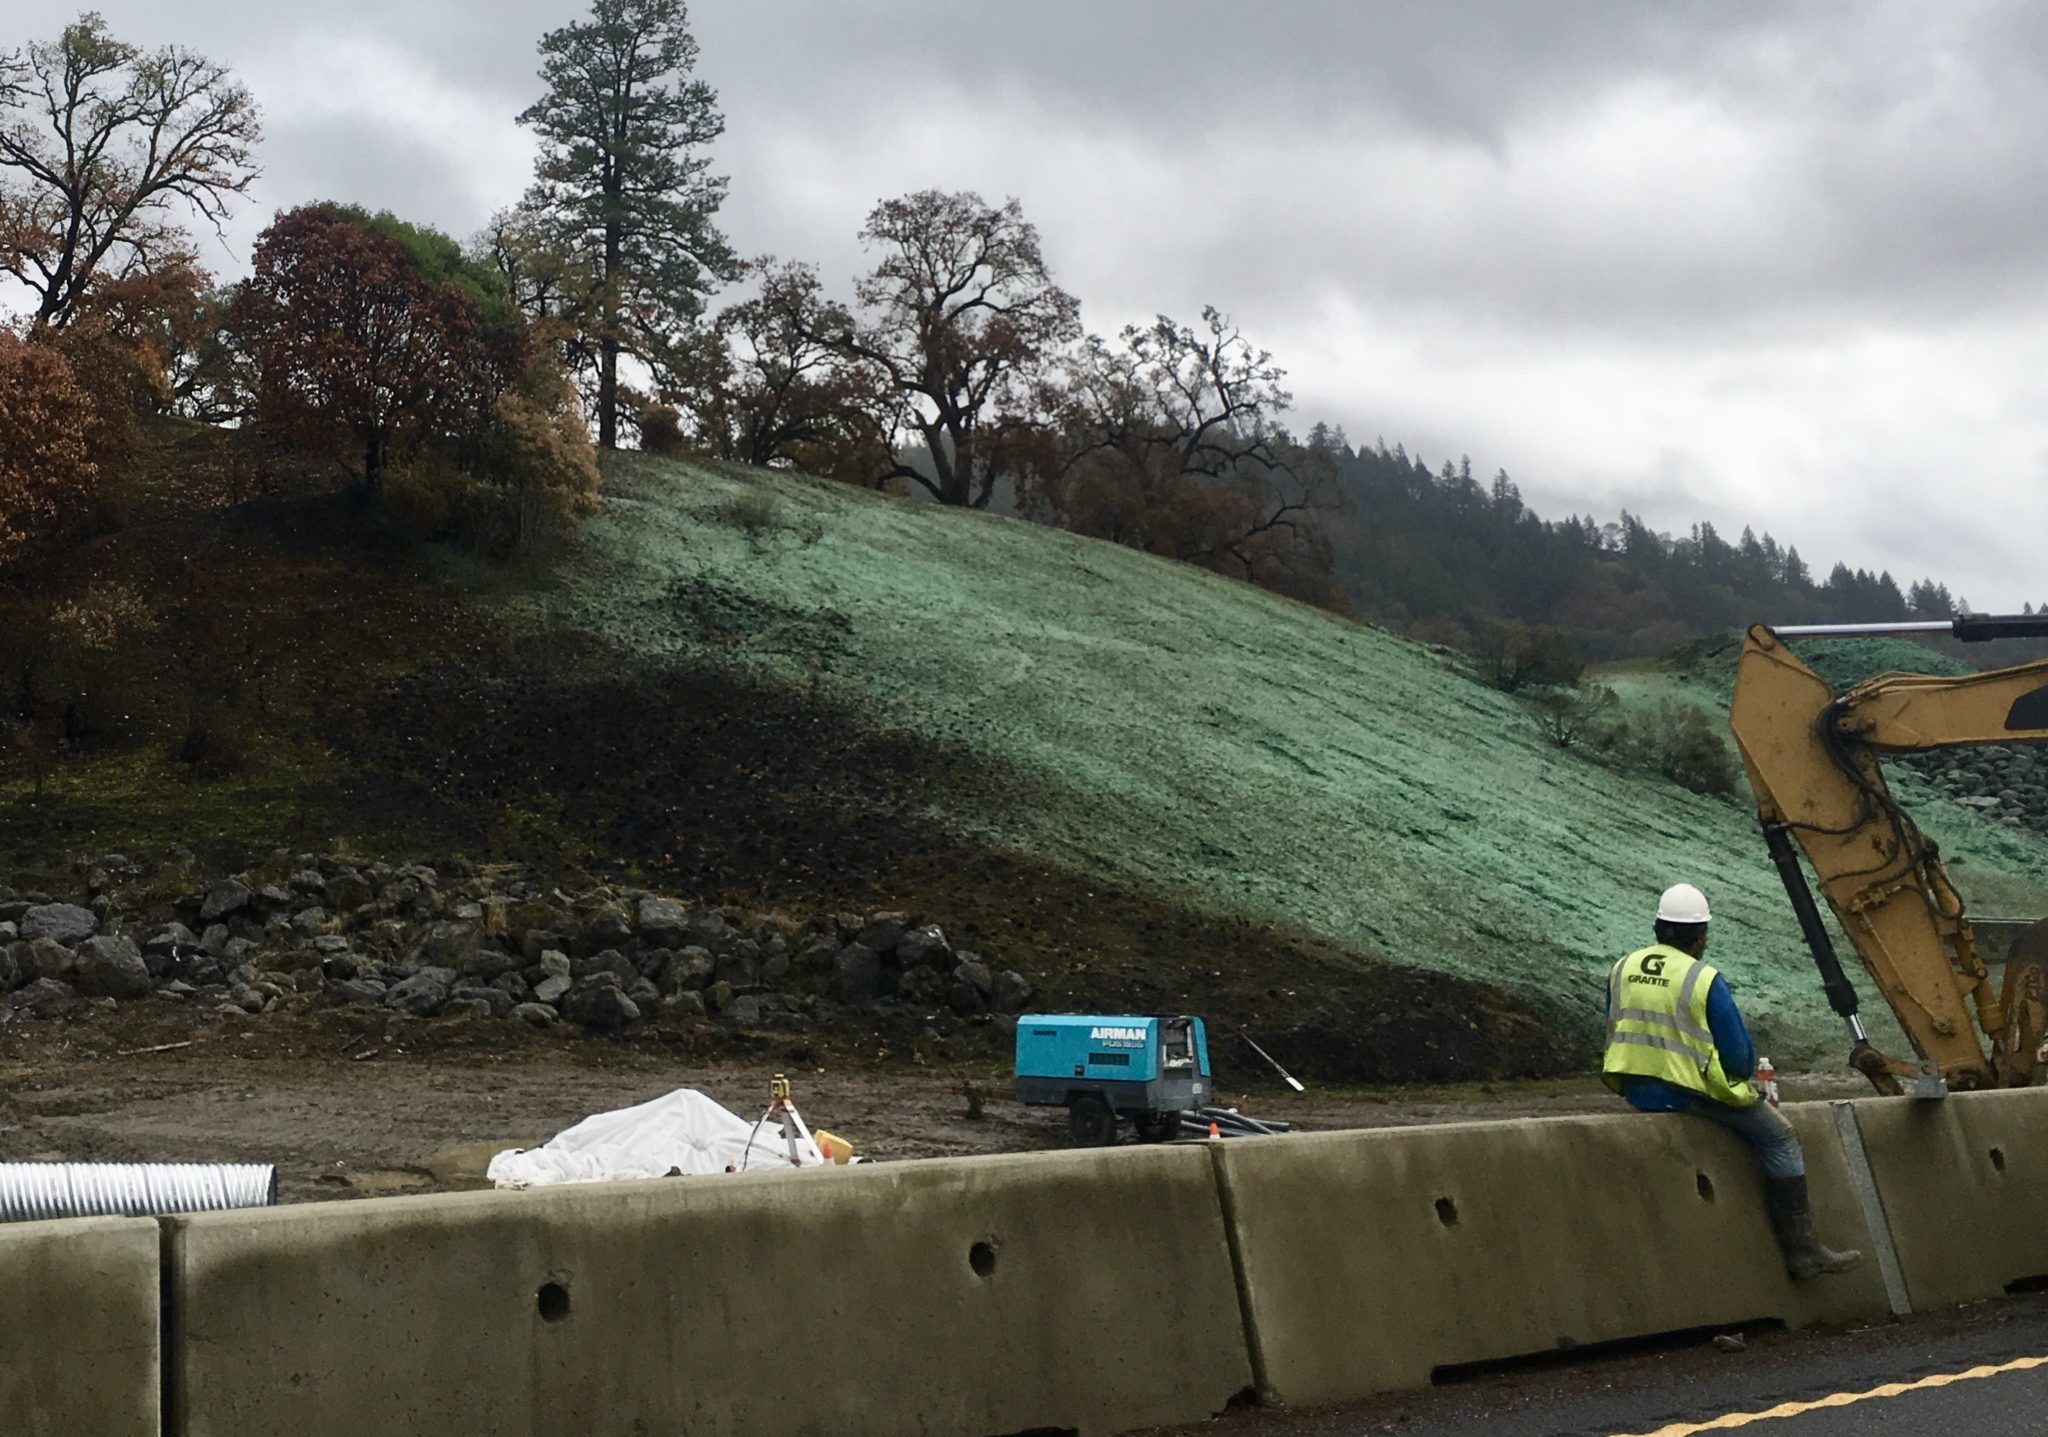 Reseeding along Highway 101 during November, 2016 after the Redwood Complex Fire.